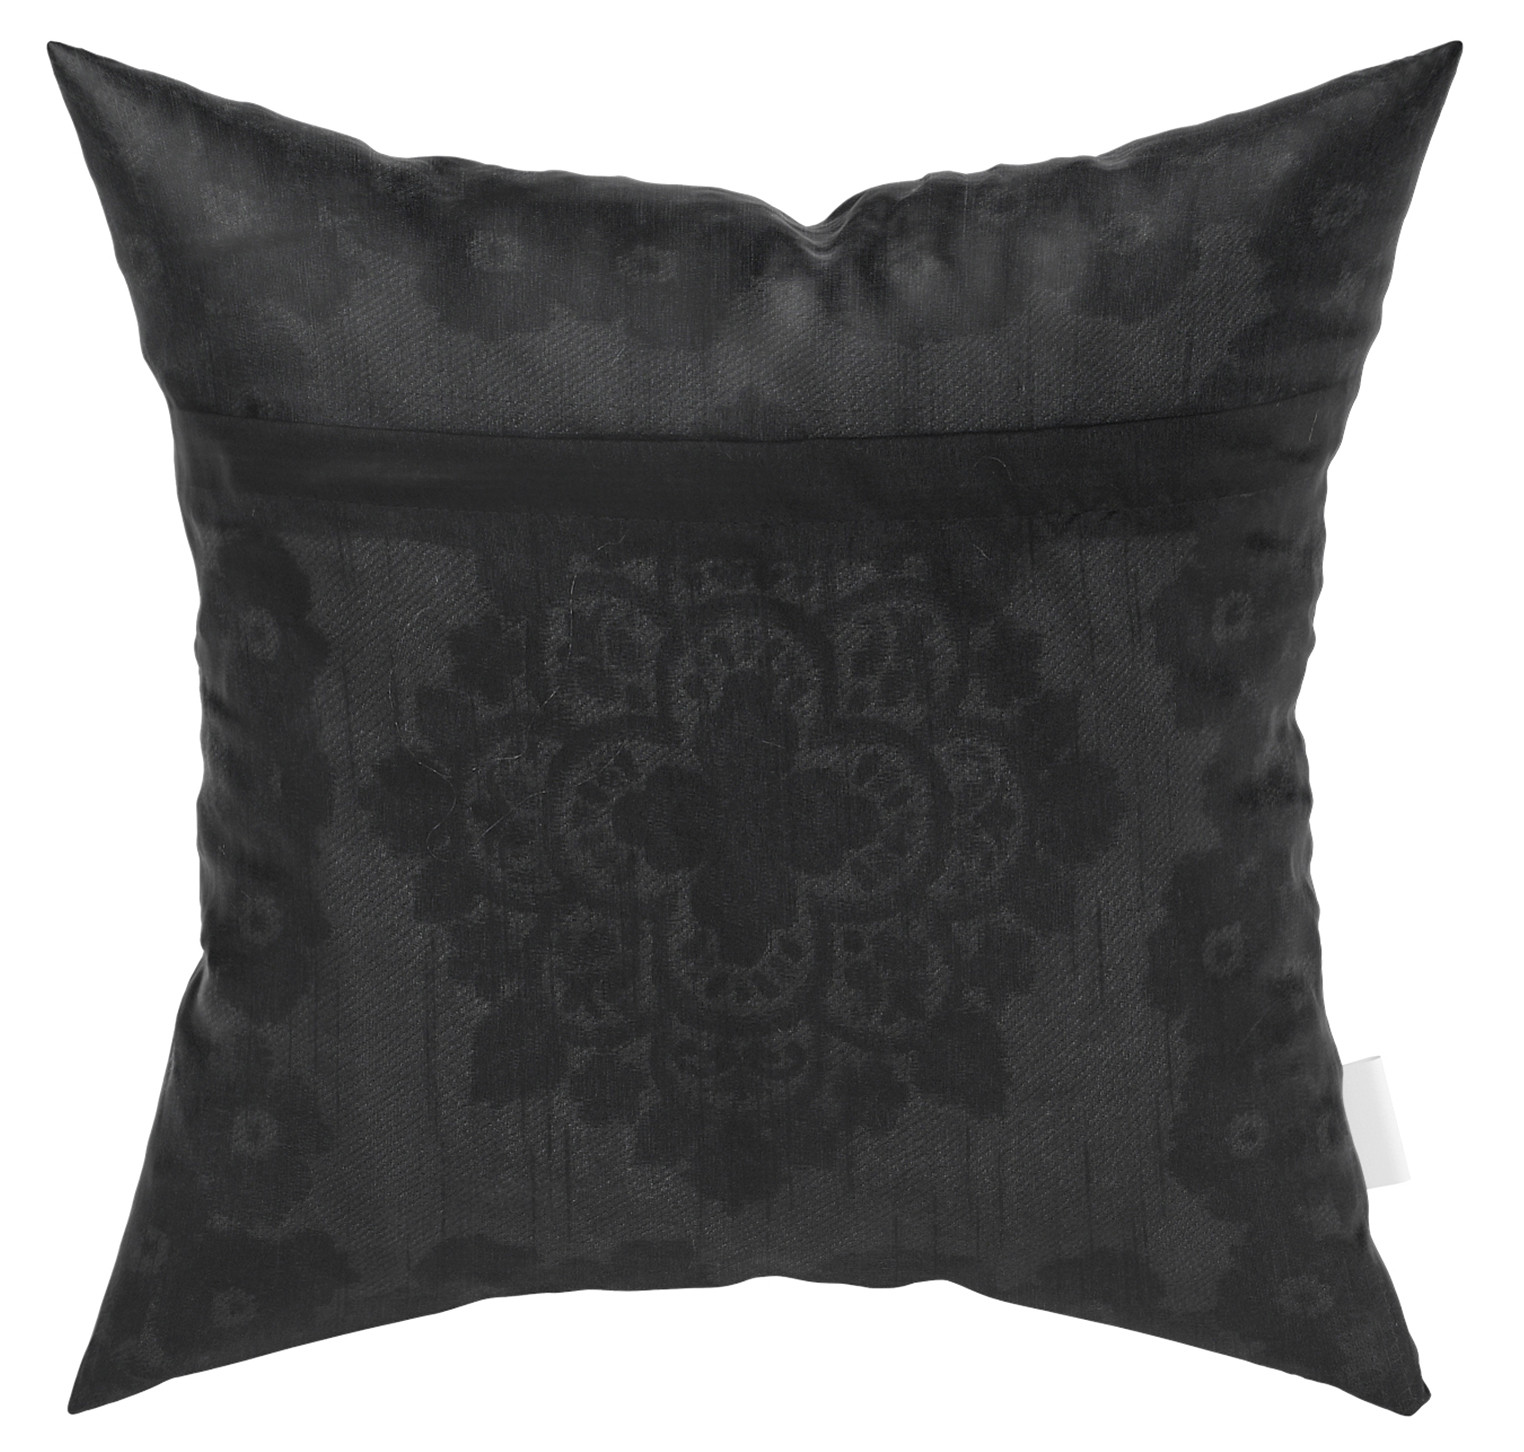 Kuber Industries Velvet Flower Design Soft Decorative Square Throw Pillow Cover, Cushion Covers, Pillow Case For Sofa Couch Bed Chair 16x16 Inch-(Black)